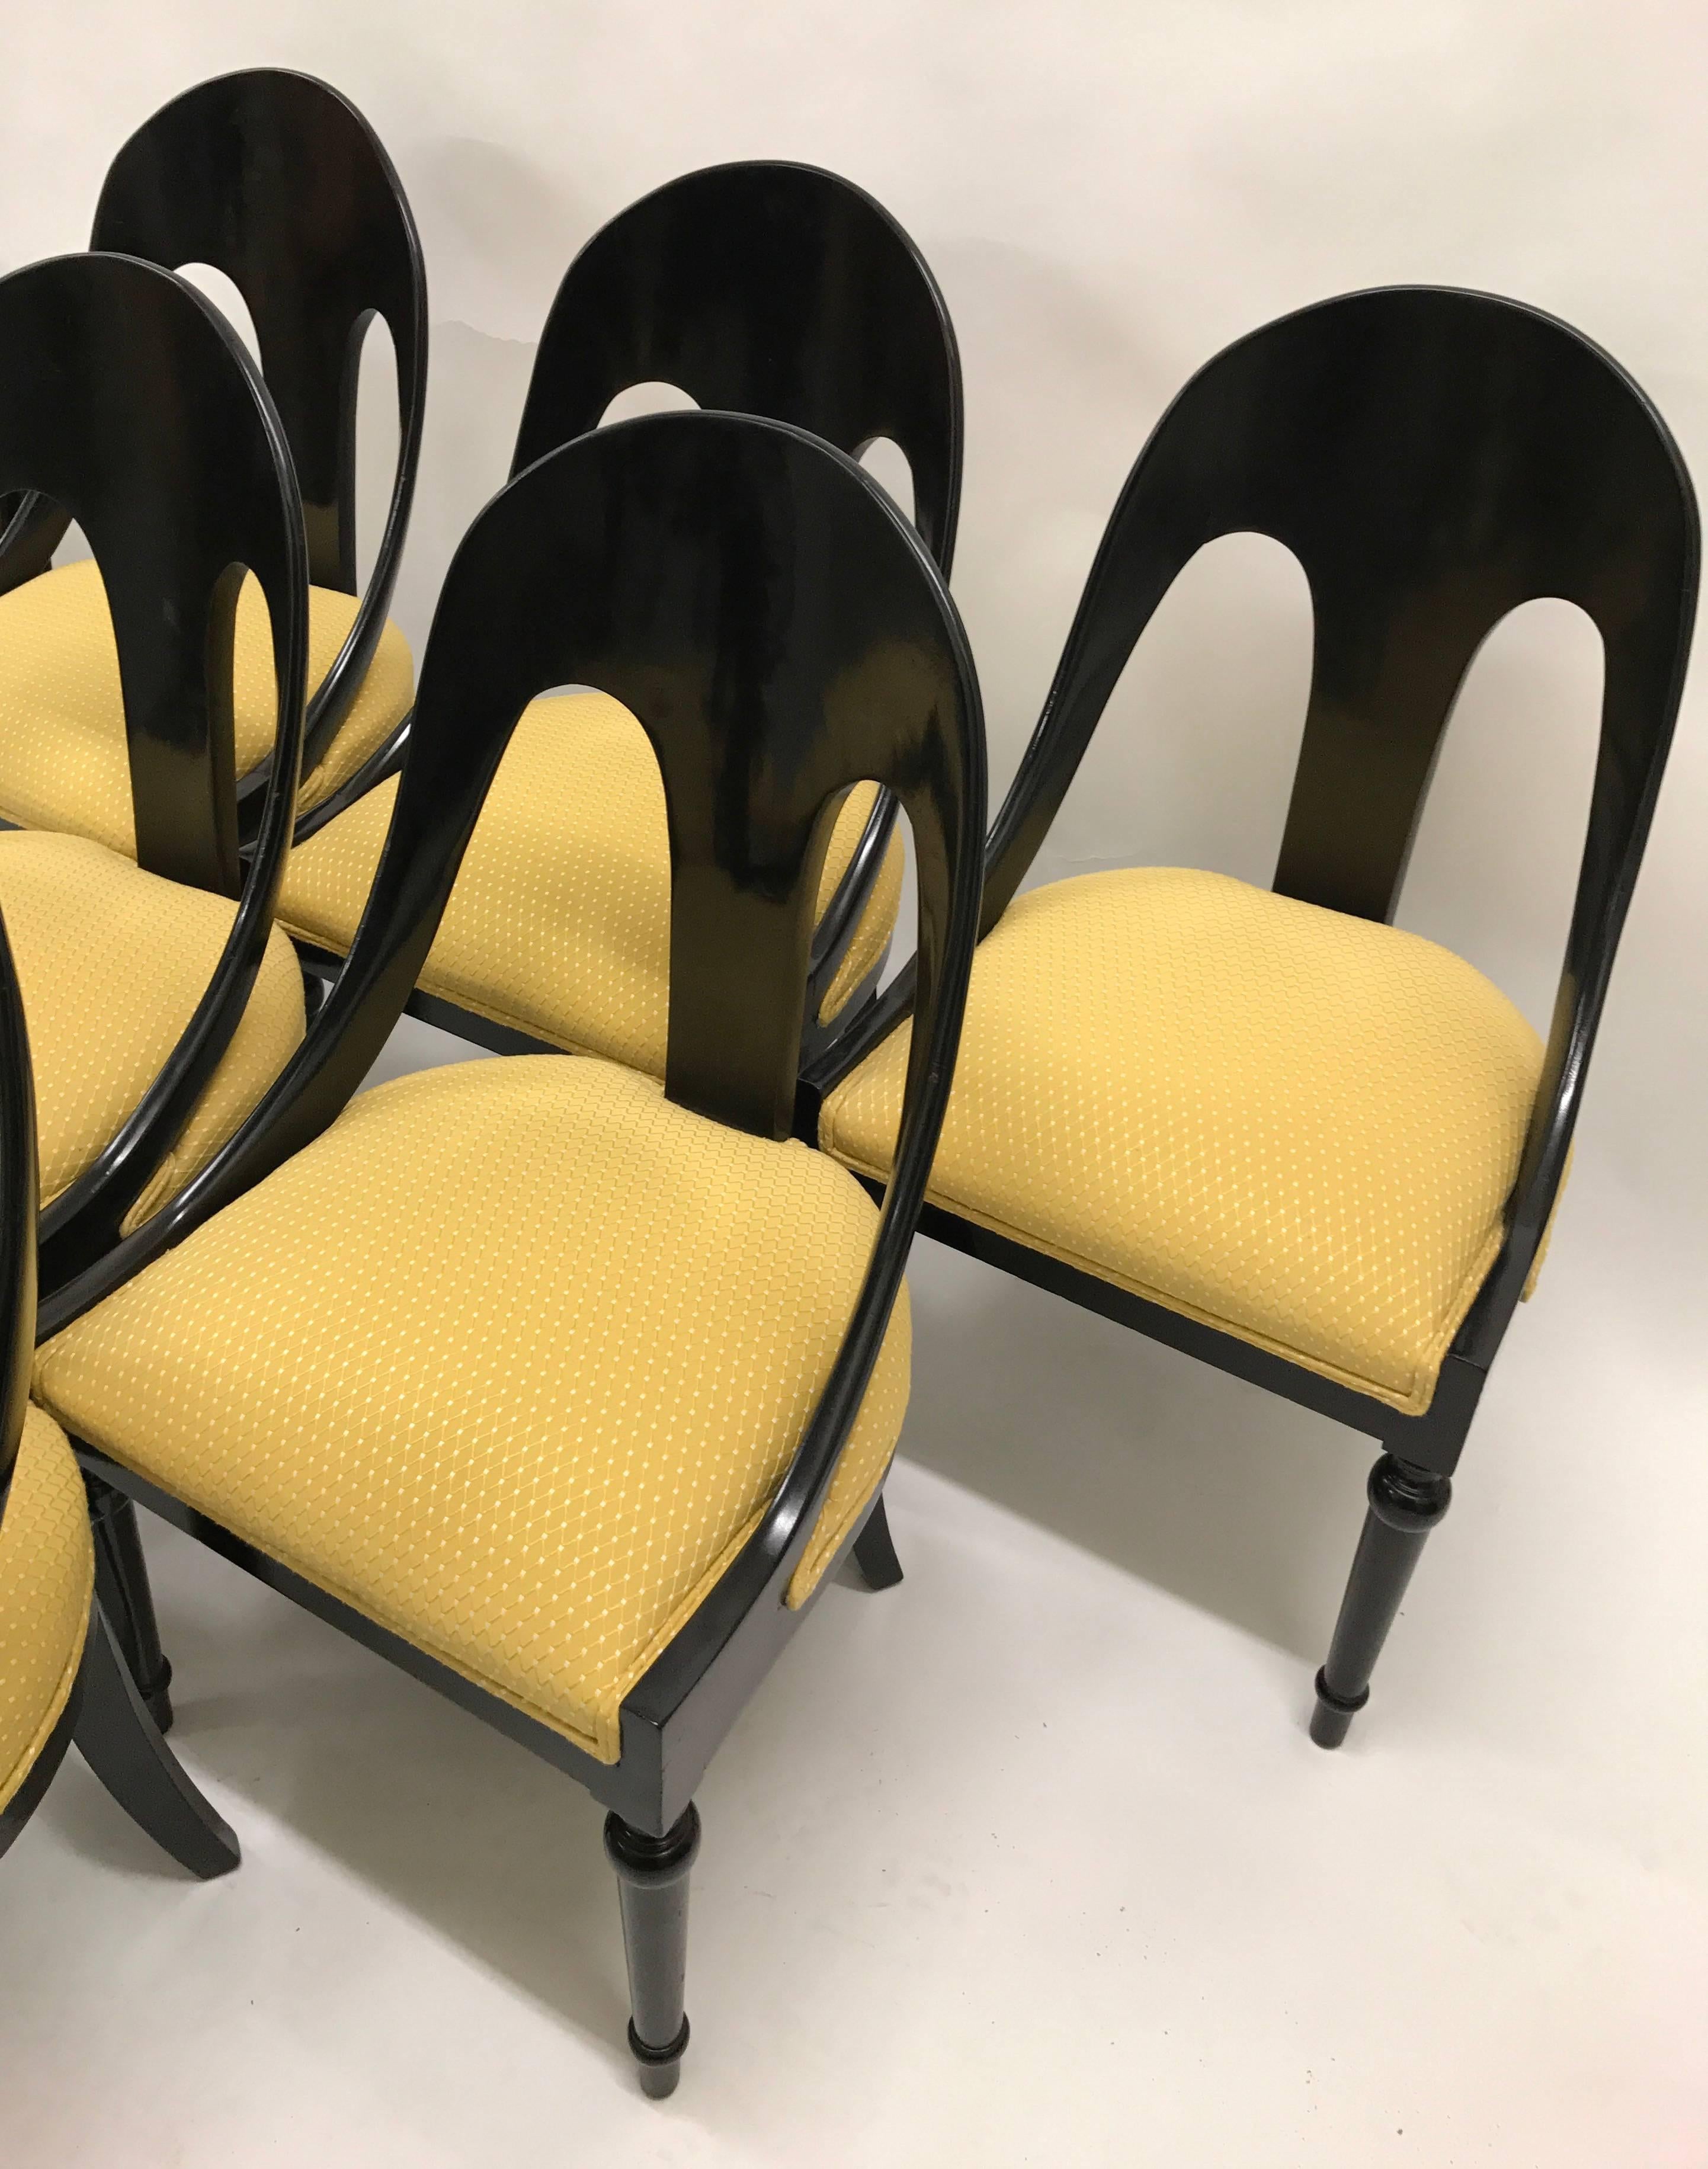 Six Neoclassical Style Lacquered Spoon Back Dining Chairs In Good Condition For Sale In Lake Success, NY